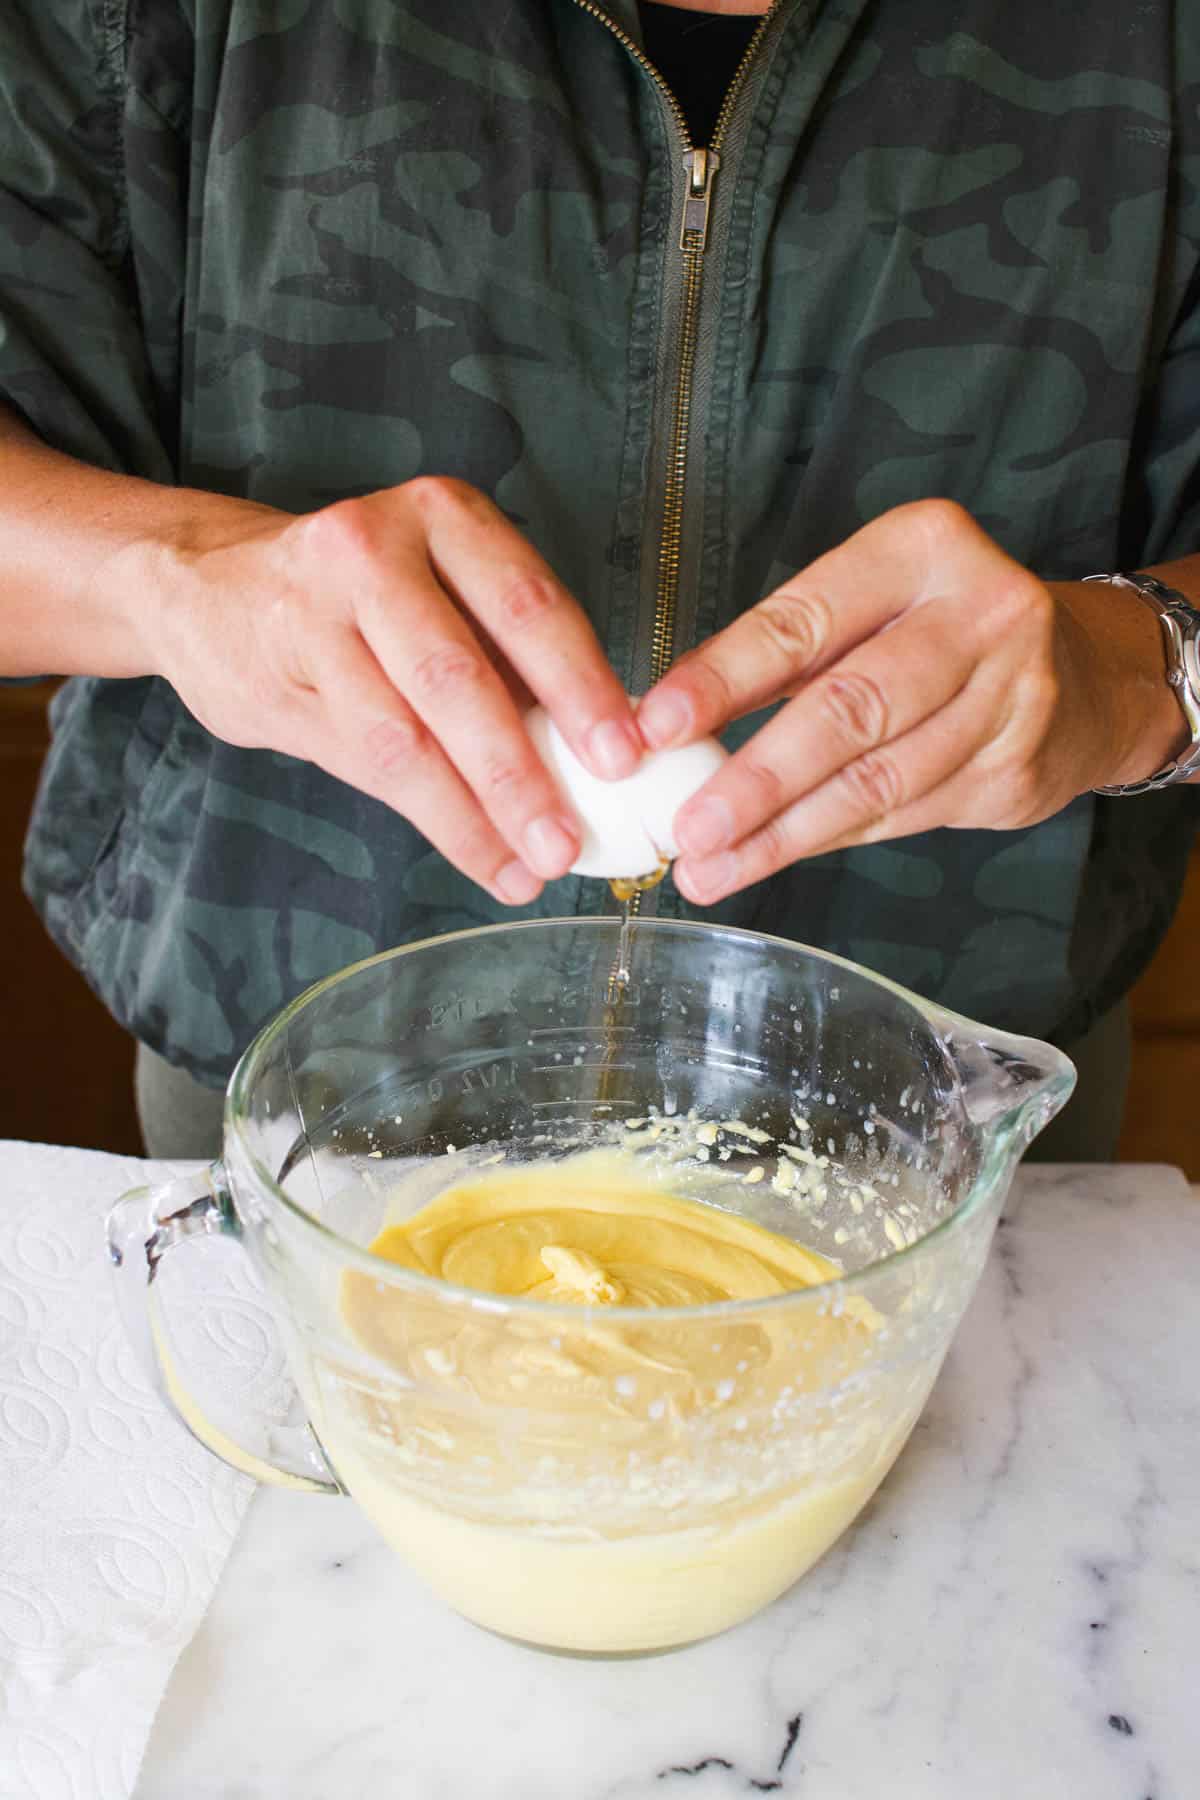 Woman adding eggs to batter bowl with cake batter.